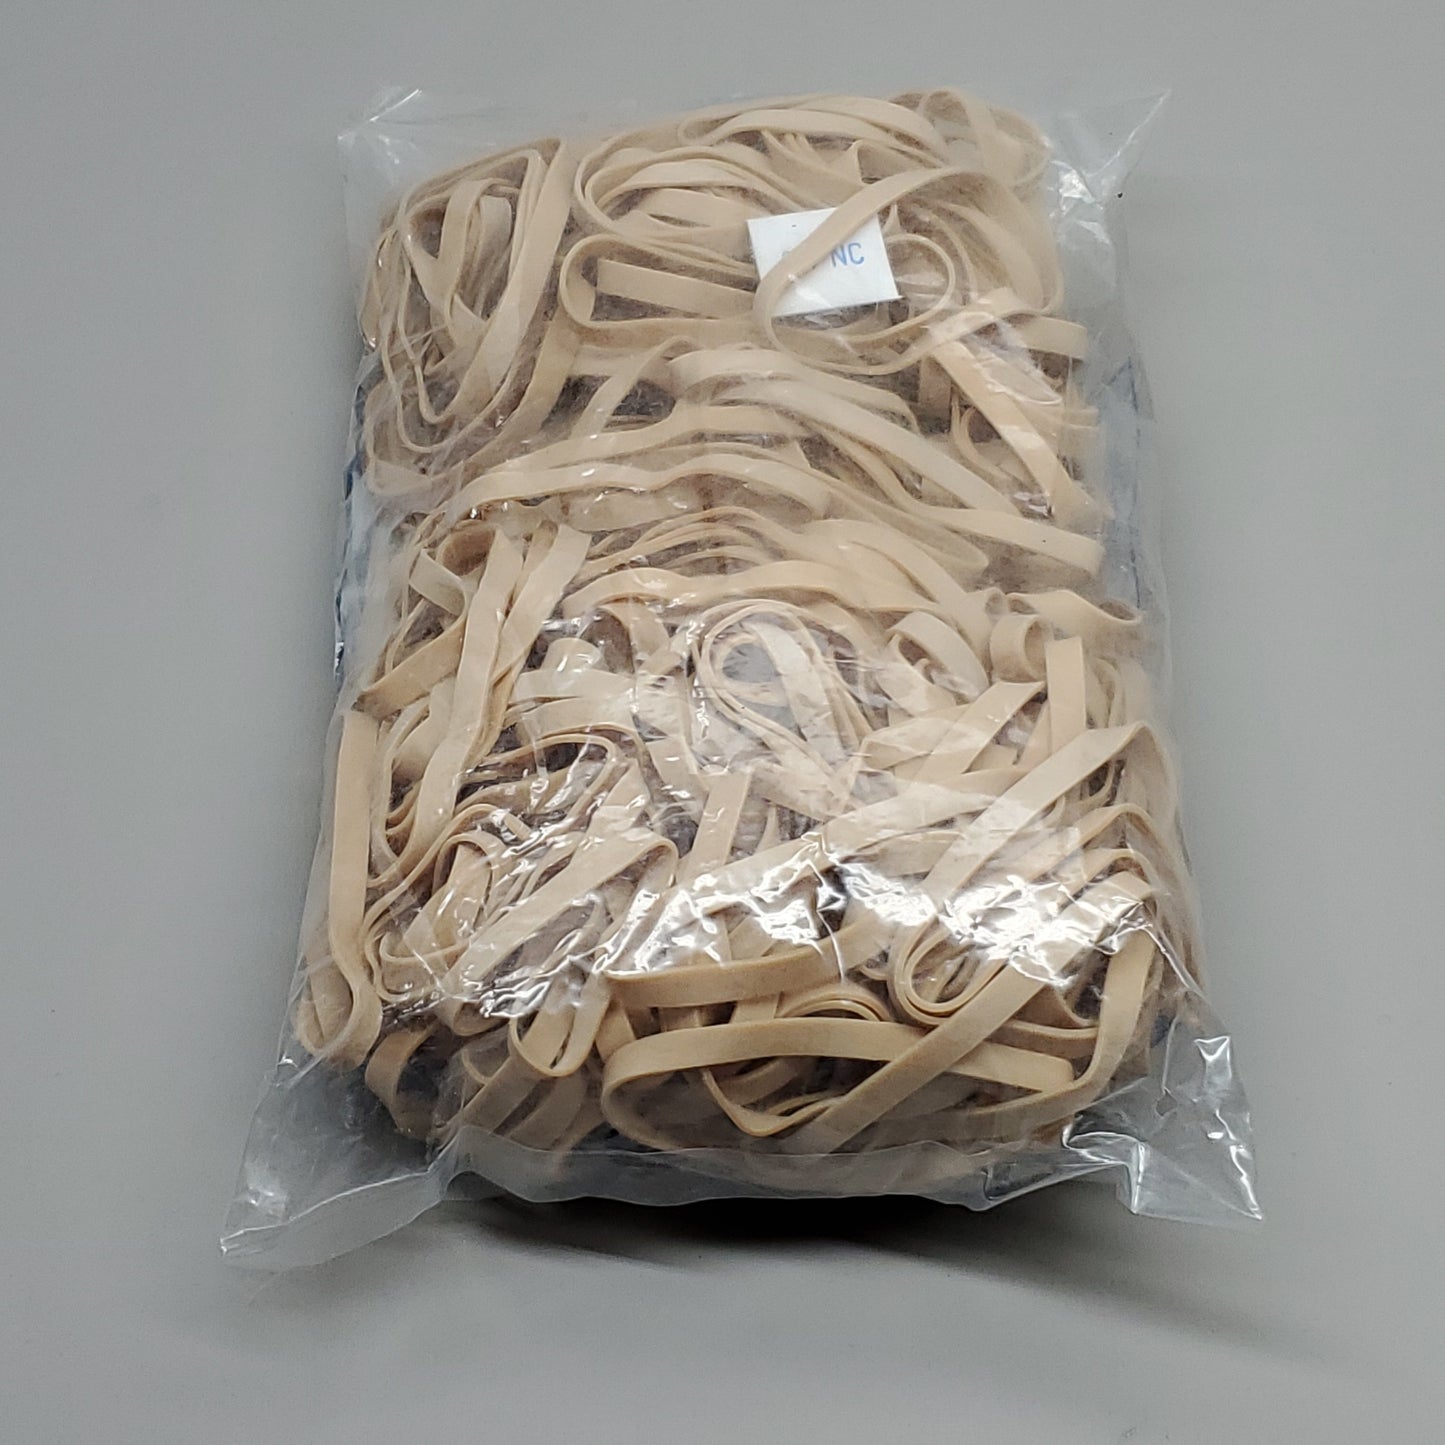 za@ ANCHOR PACKAGING CO The Beacon Line Rubber Bands 3 lbs Total (3 x 1 lb Bags) Size 64 (New) B